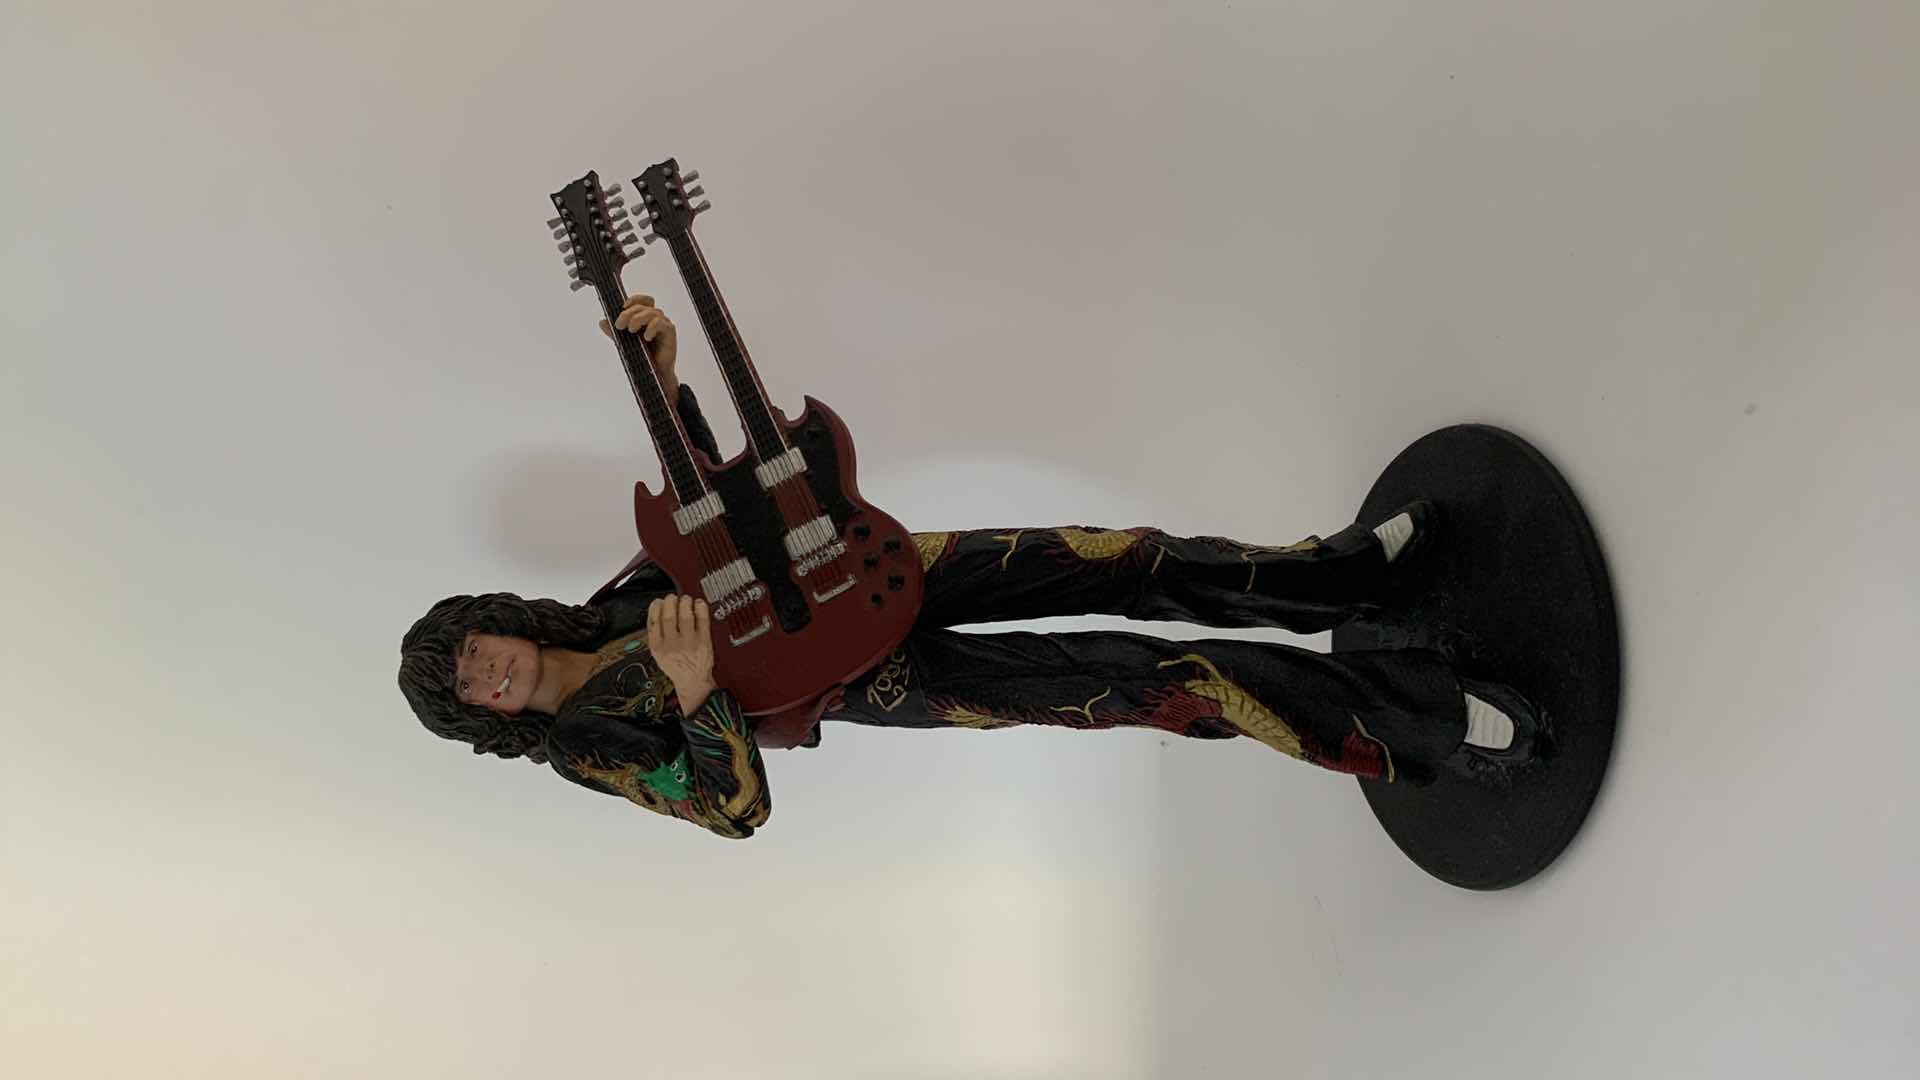 Photo 1 of 2006 NECA TOYS JIMMY PAGE ACTION FIGURE.